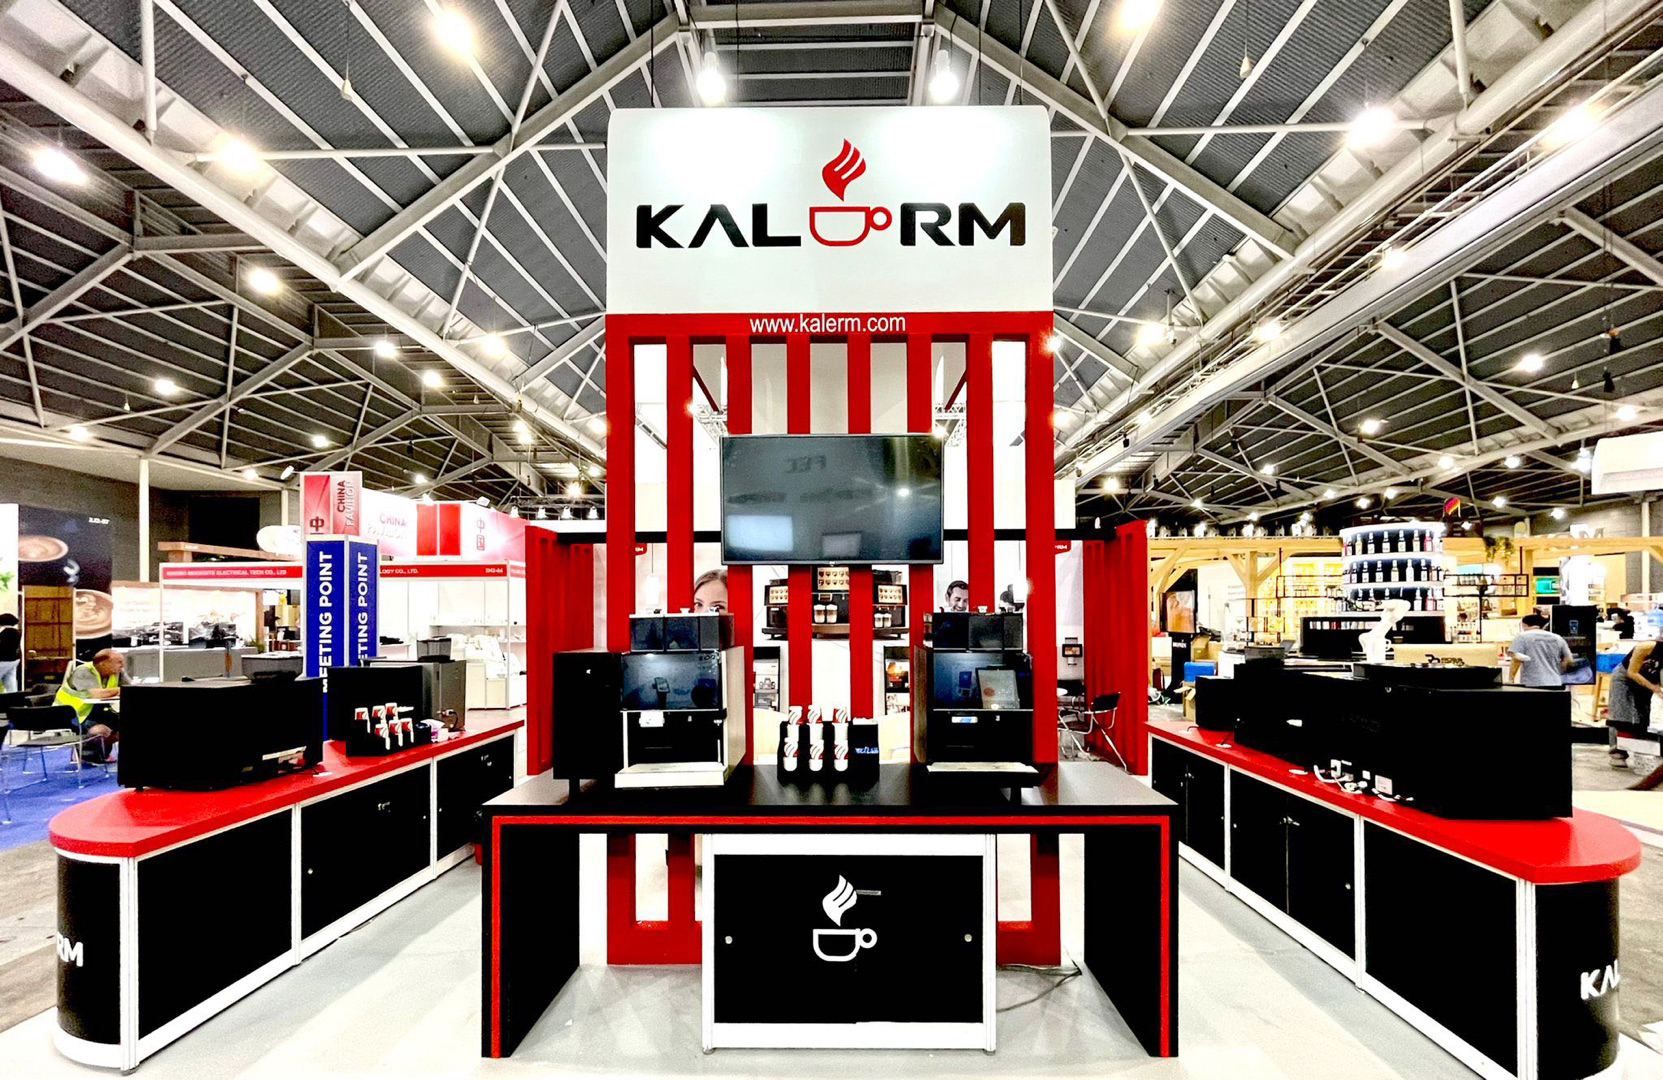  Kalerm Automatic Coffee Machines Showcased at howcased at 2022 Seoul Caf Show